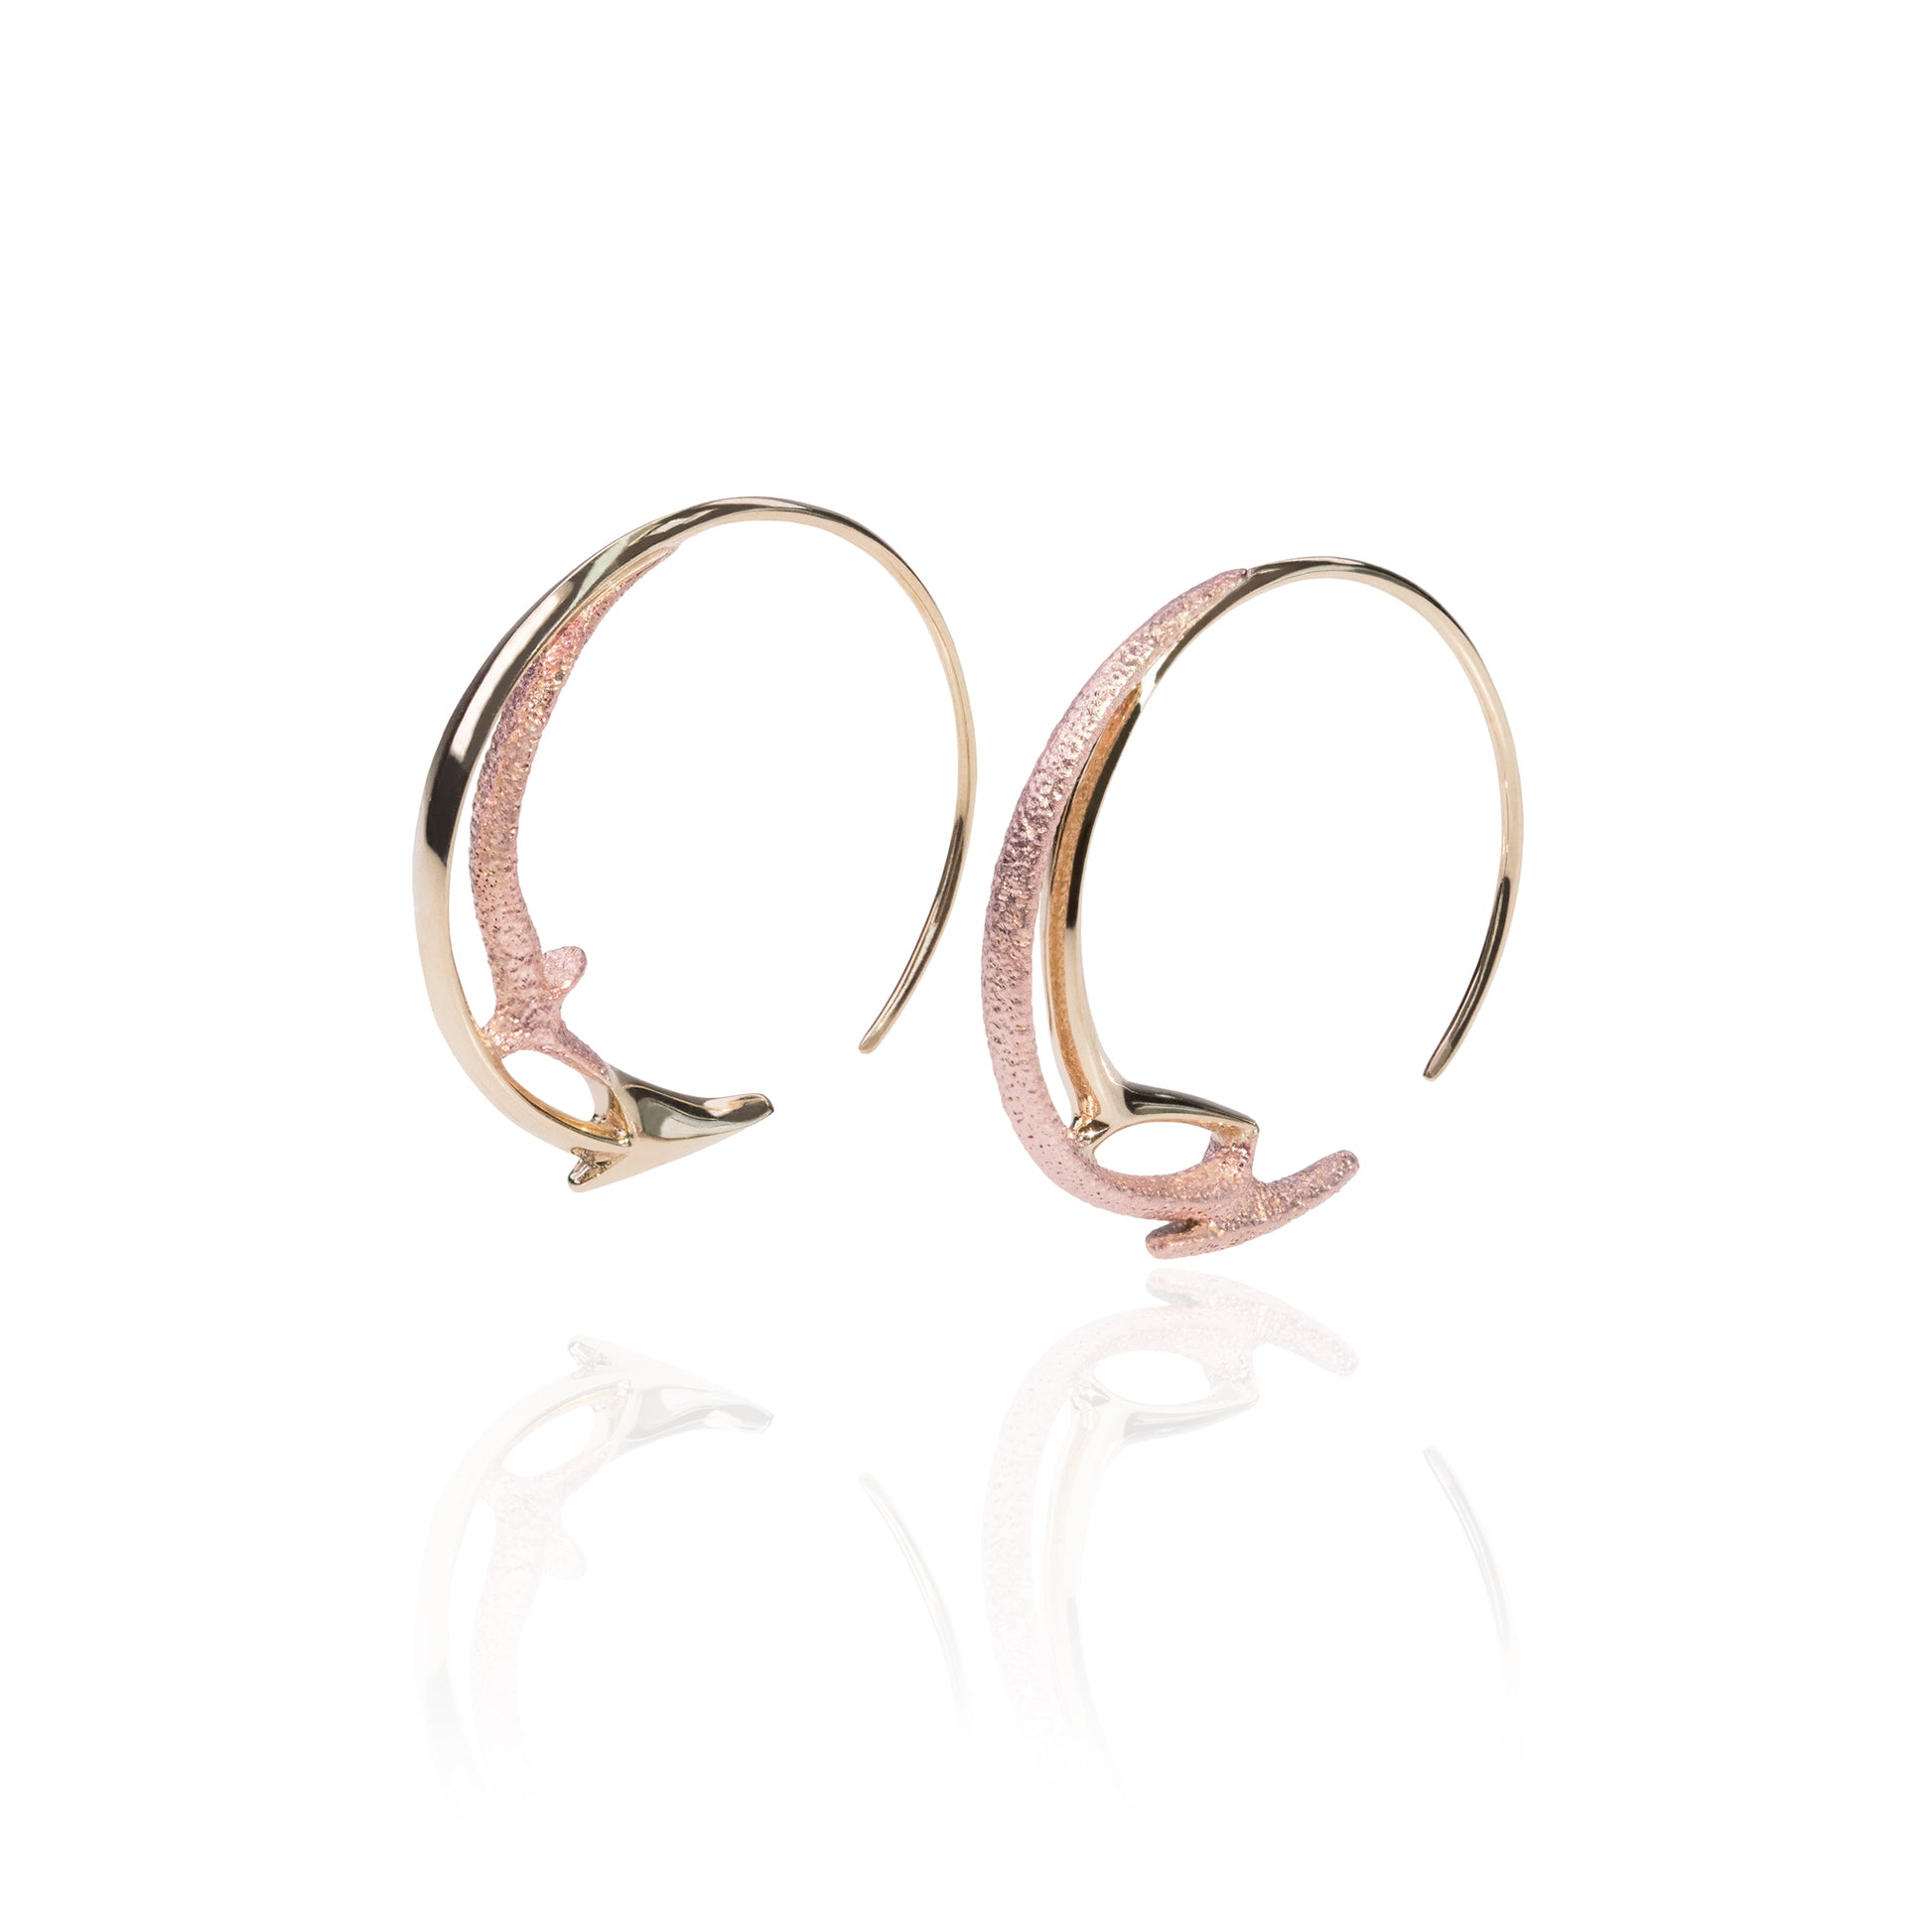 Orme-Brown Contemporary Fine Jewellery ethical asymmetrical spiral hoops in sustainable recycled 9ct yellow and rose gold 1